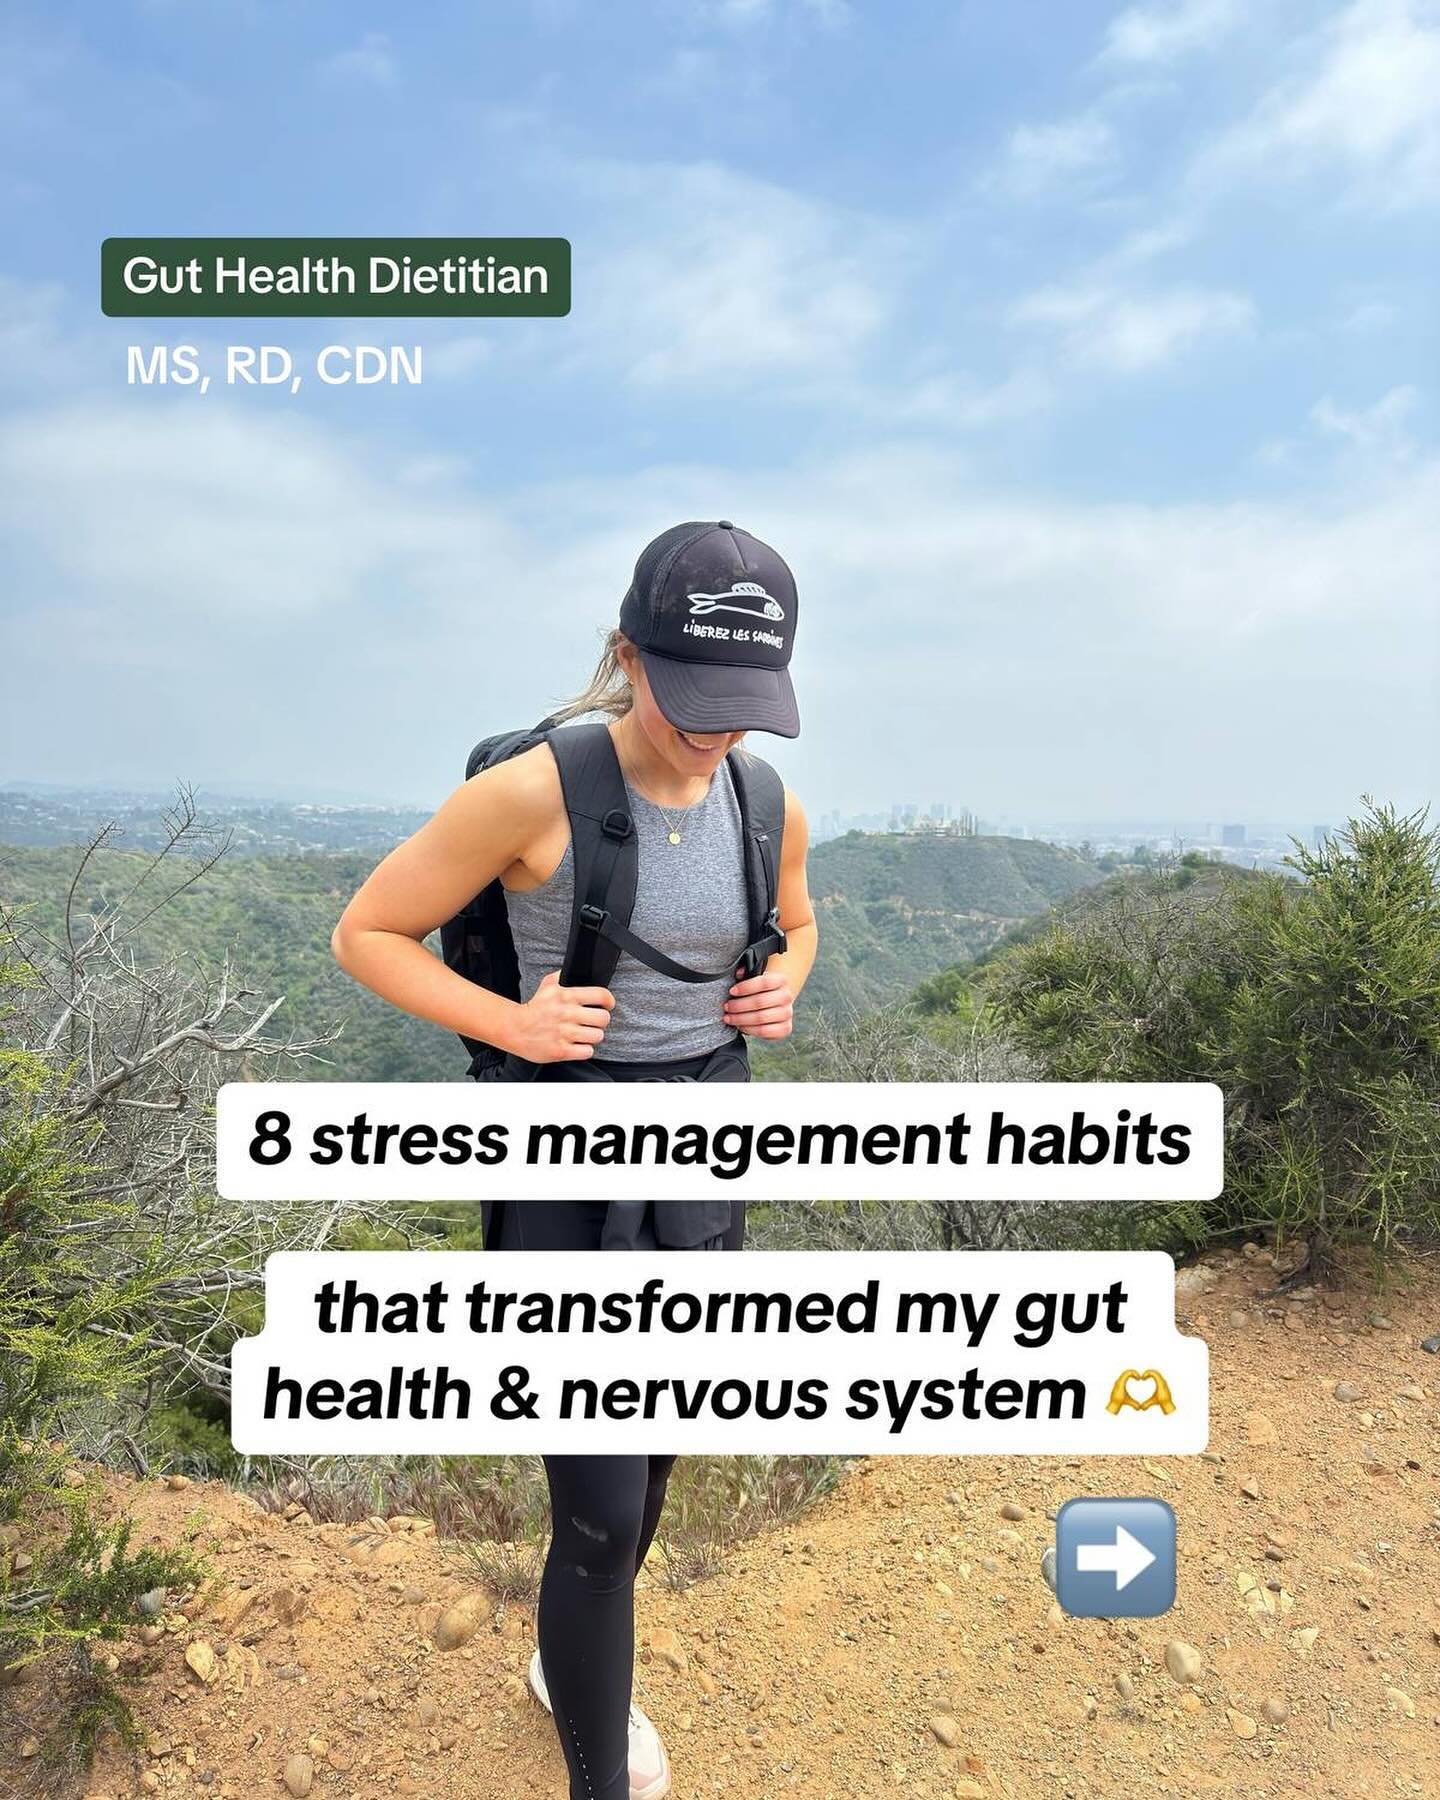 Comment which one you&rsquo;ll aim to incorporate for your stress levels, digestion, or overall health 👇 looking for support along the way? Comment &ldquo;GUT HEALTH&rdquo; to start my 🆓 30 Day Gut Health Transformation where I guide you daily in b